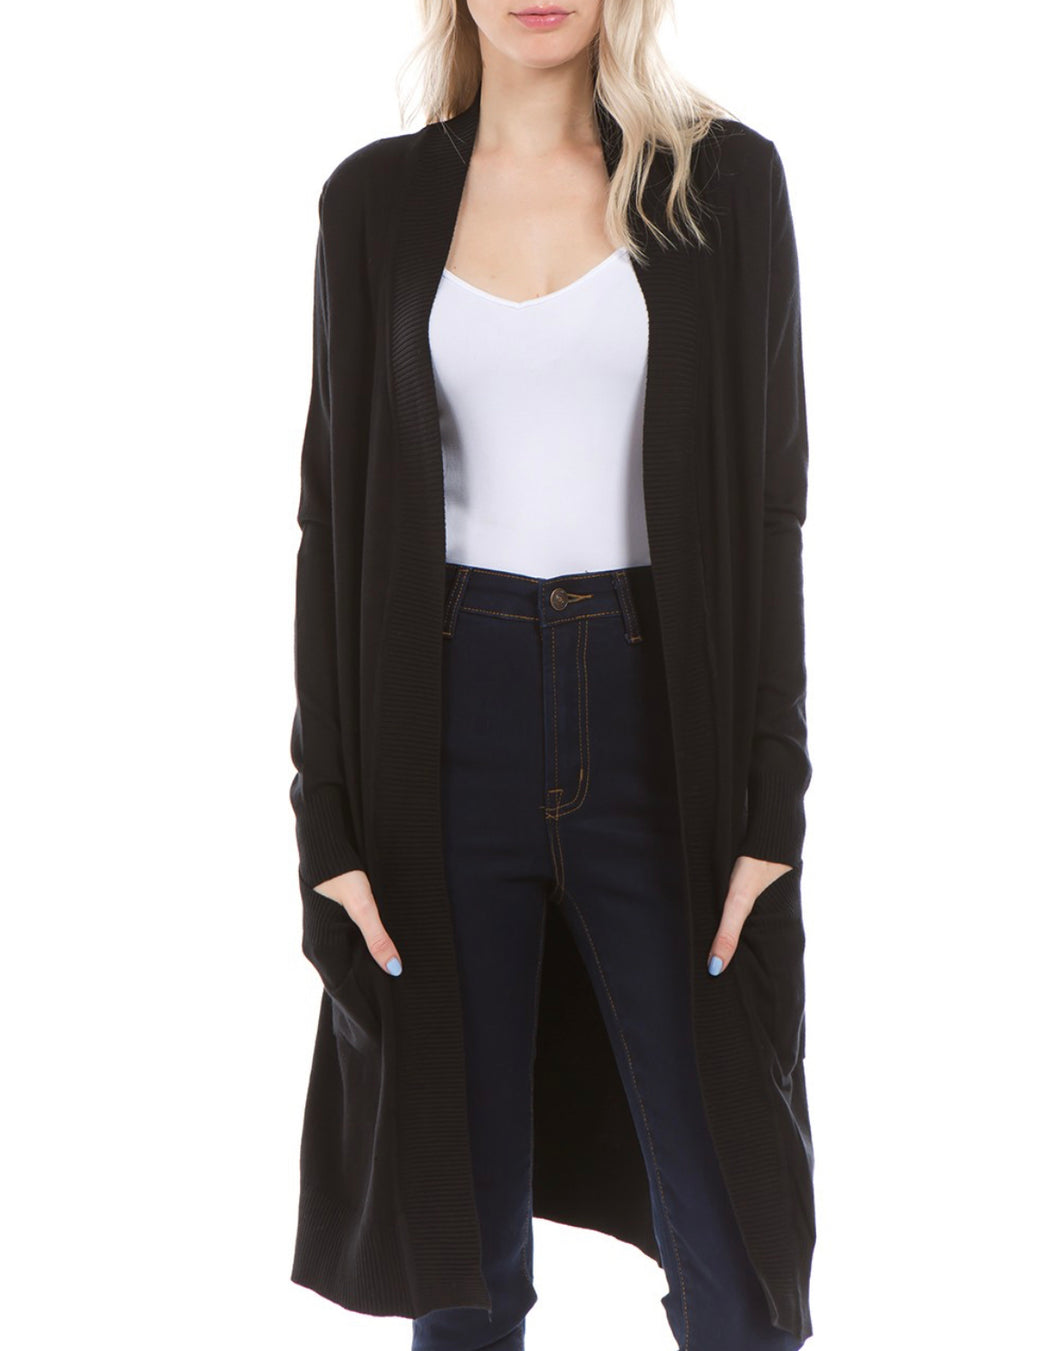 Black Long Cardigan with Pockets